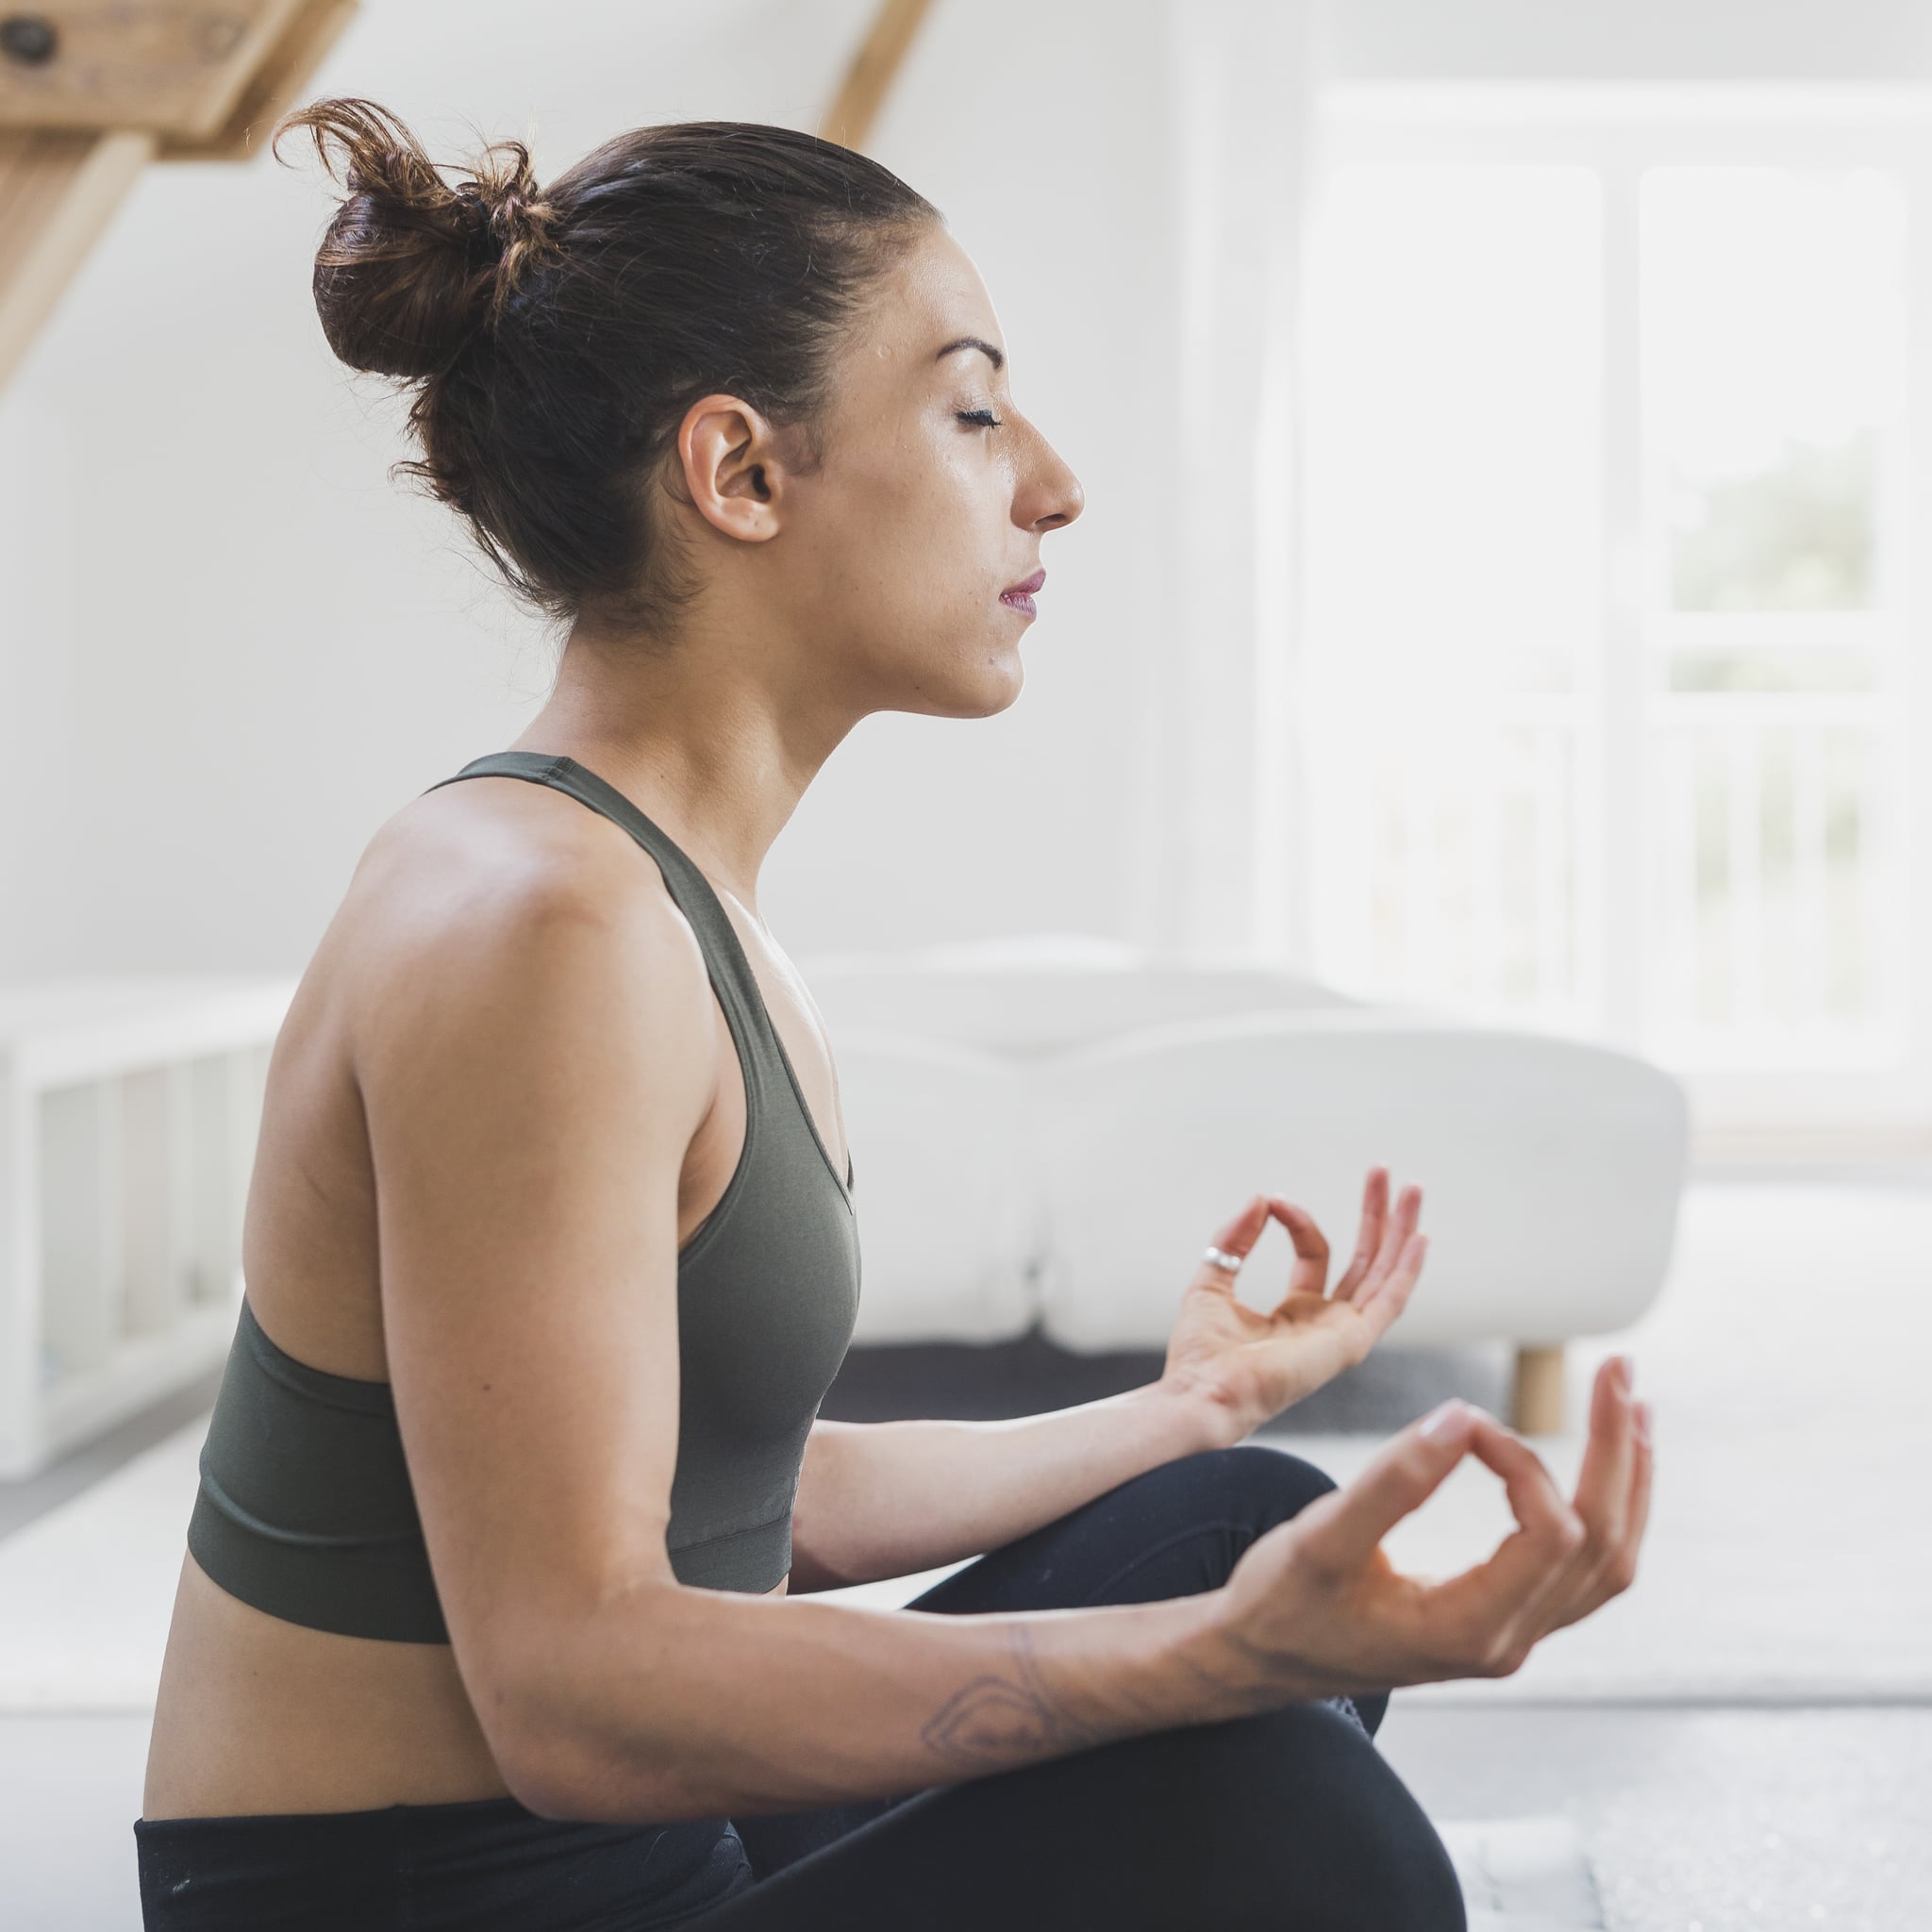 Can We Do Yoga And Gym Together? Answered By Experts –